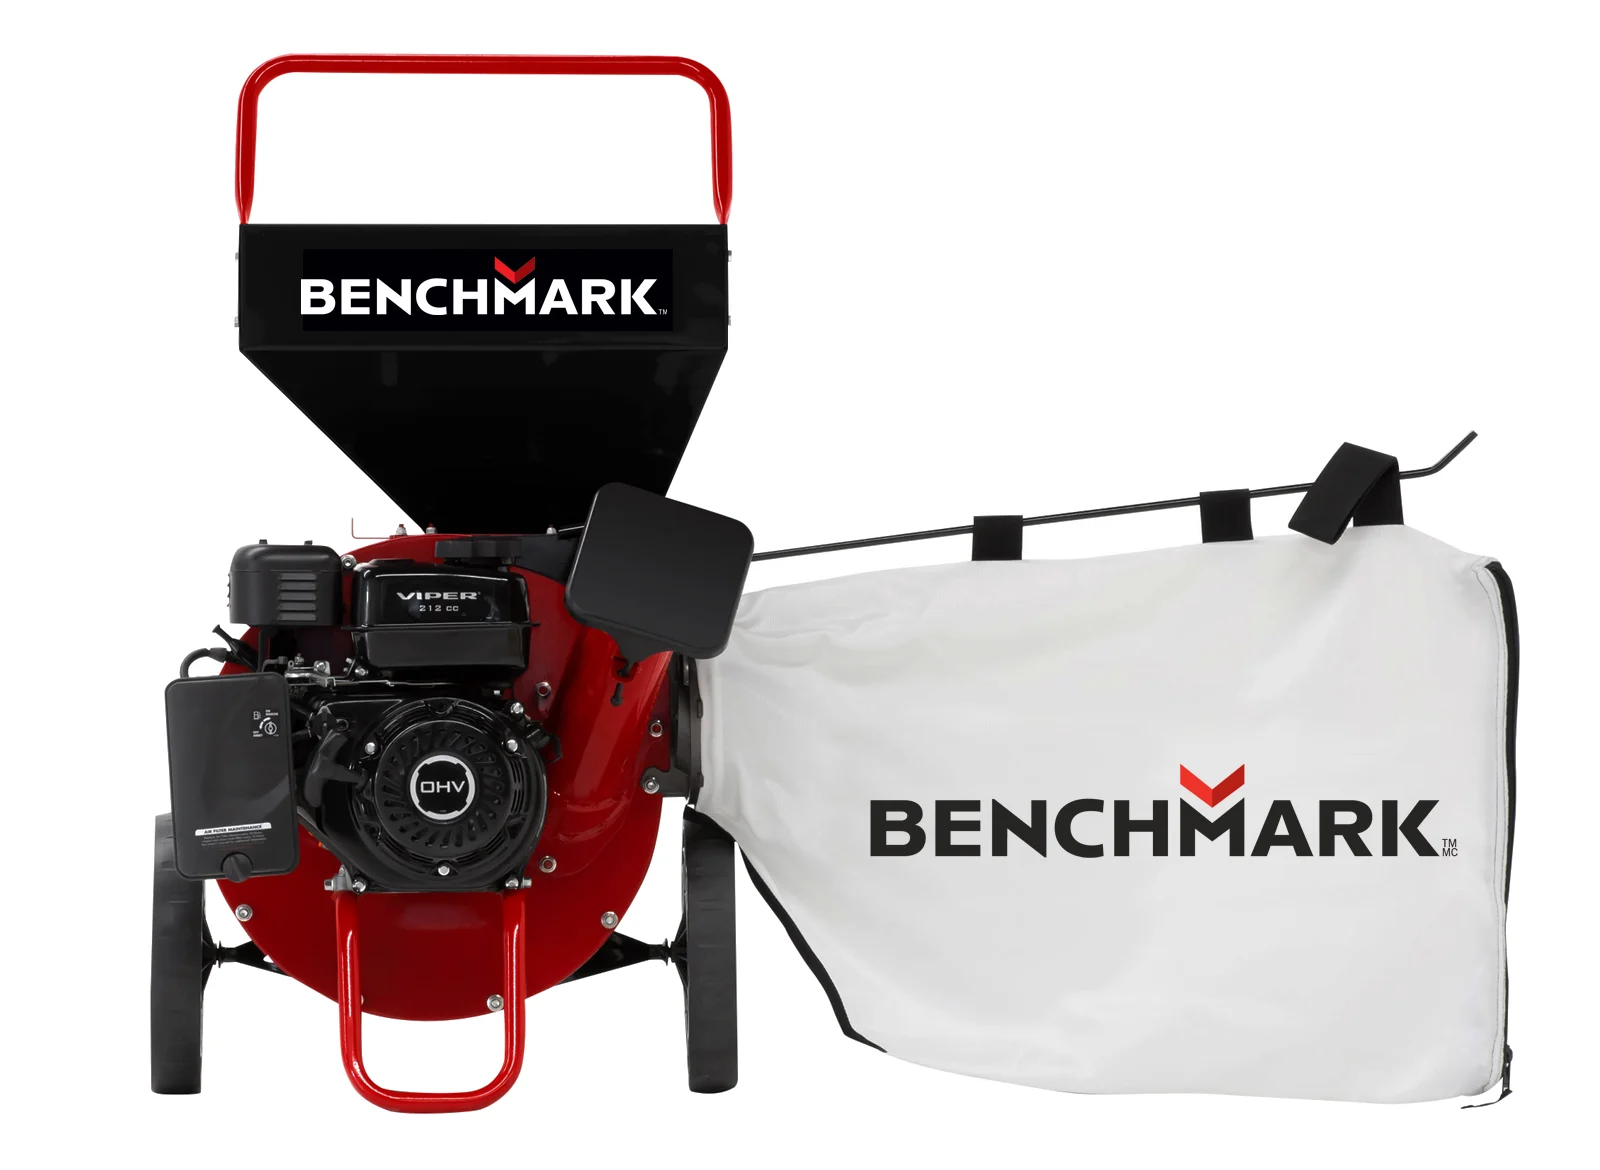 BENCHMARK Gas-Powered Wood Chippers